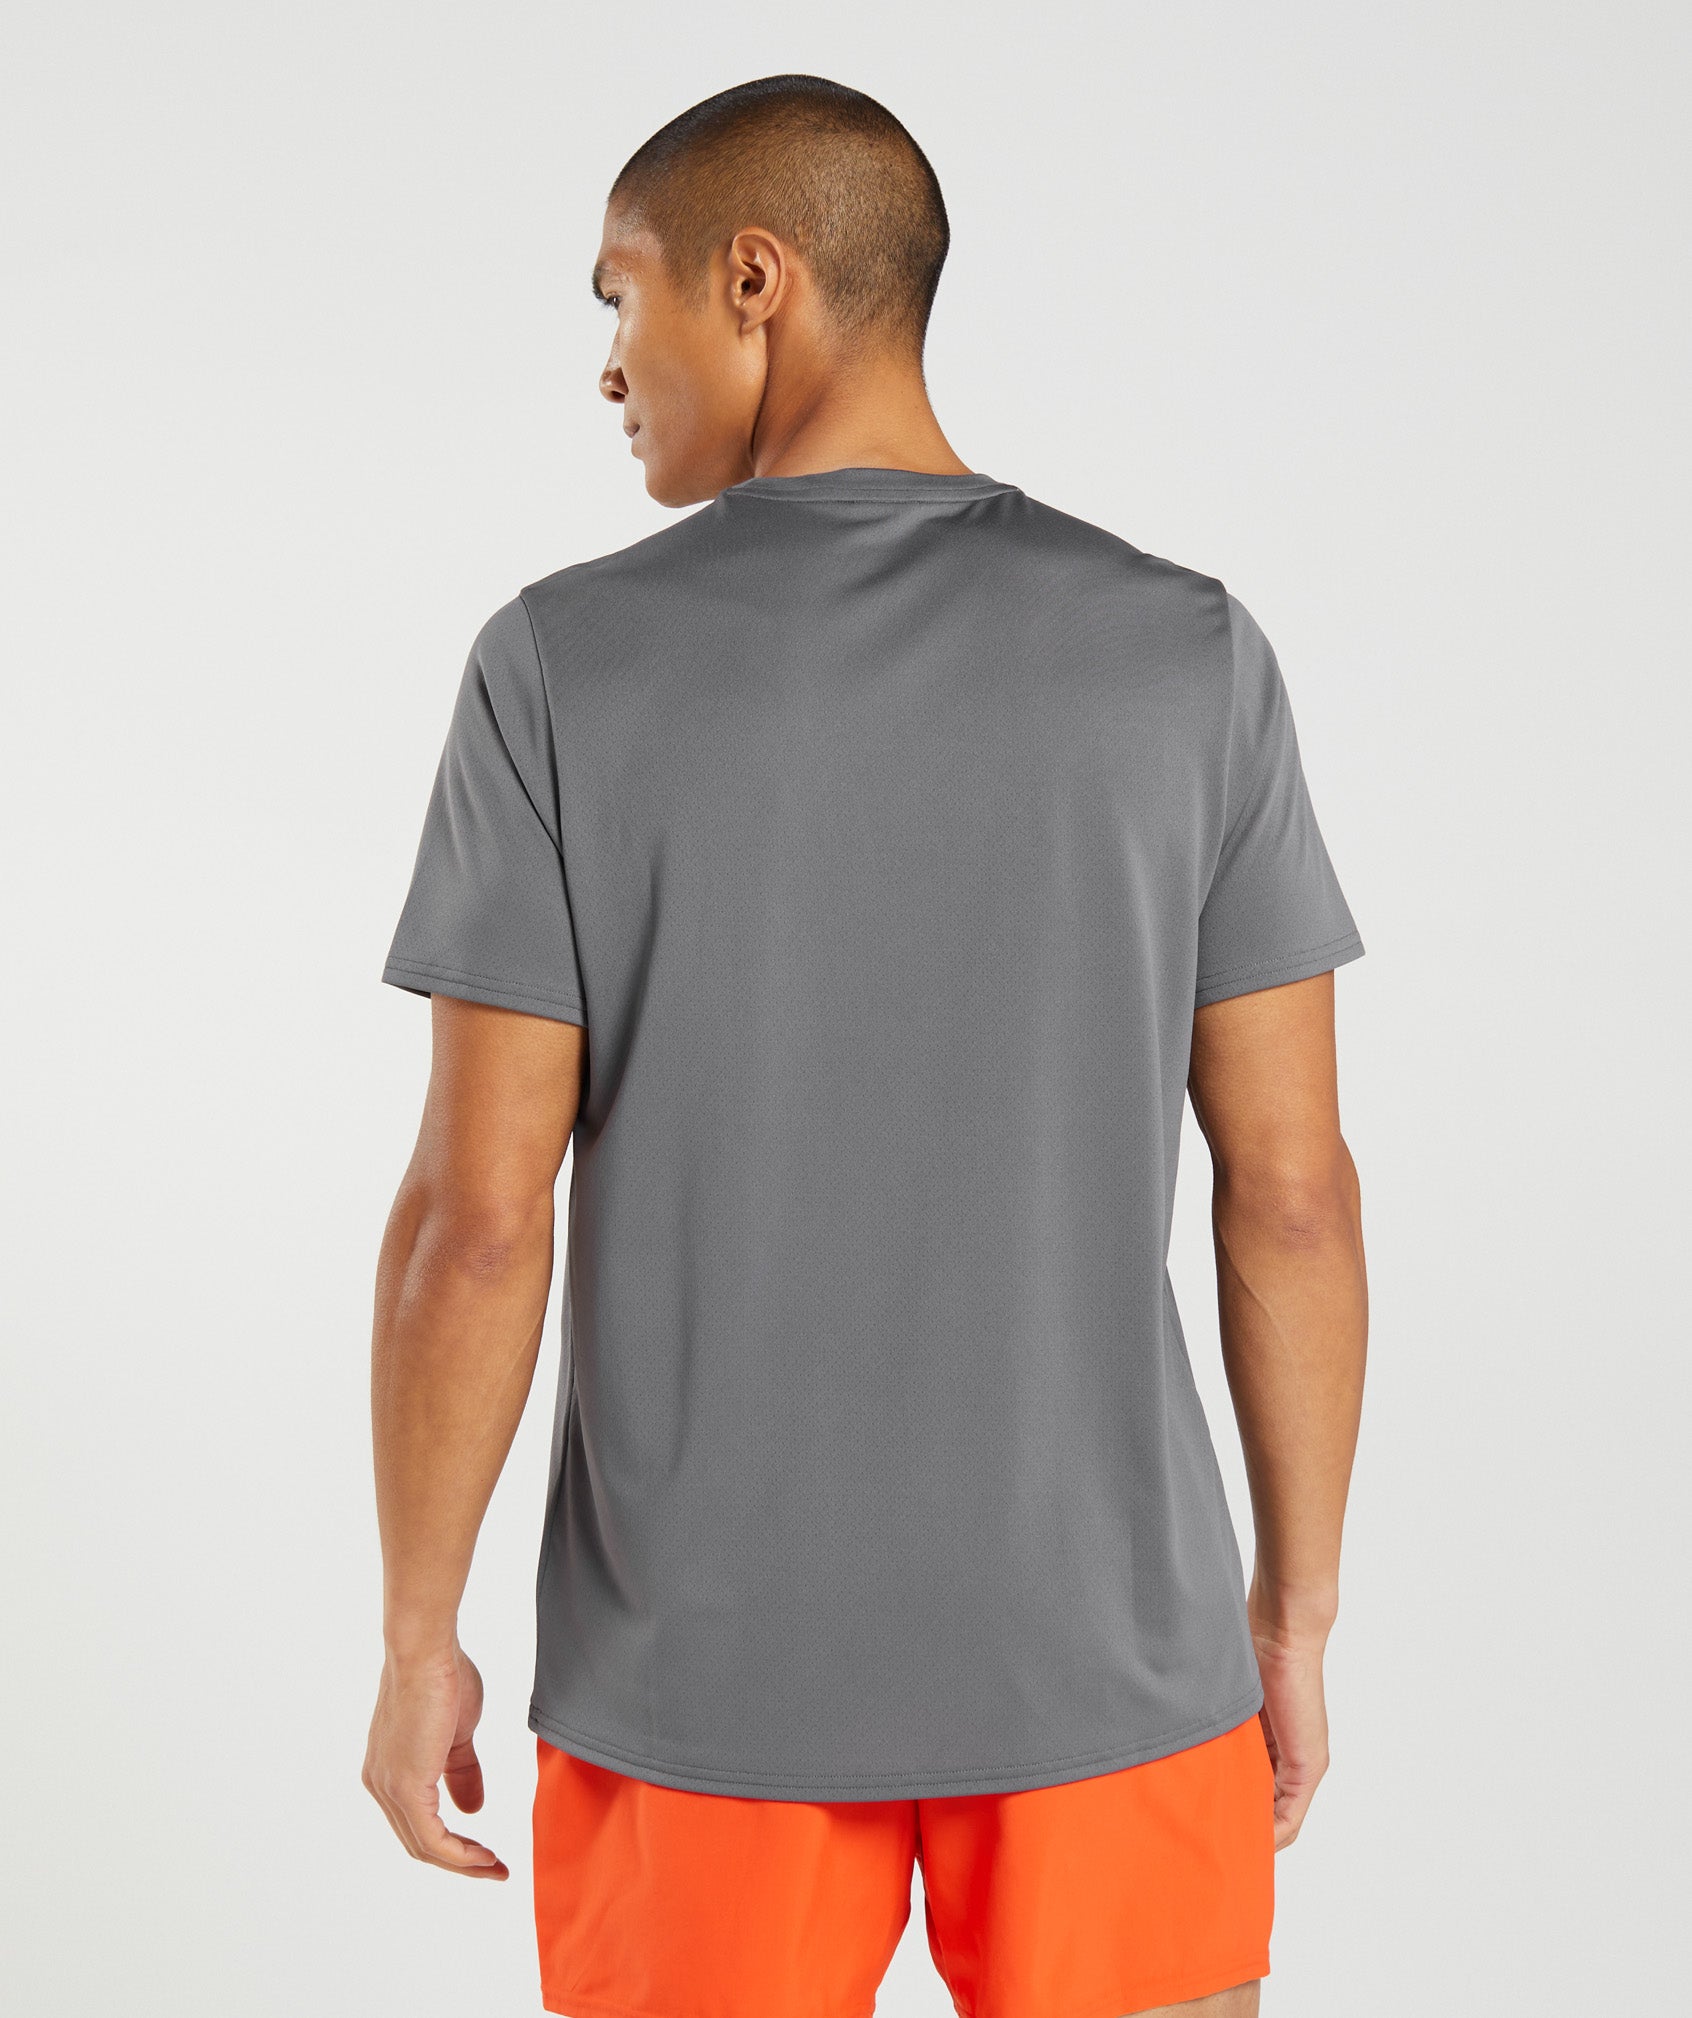 Arrival T-Shirt in Silhouette Grey - view 2